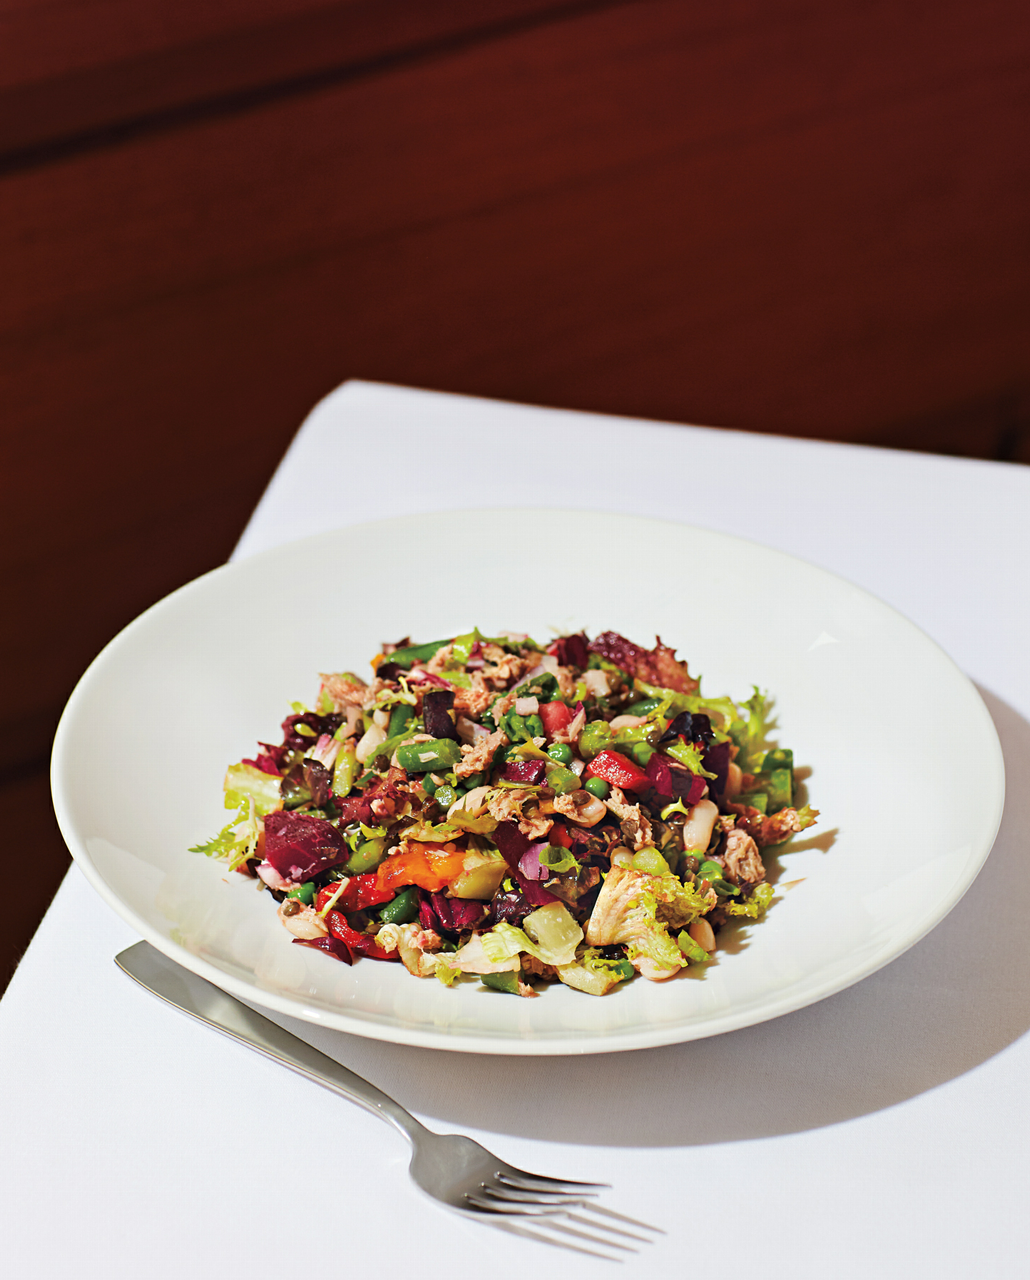 One of Strausman's famous chopped salads.